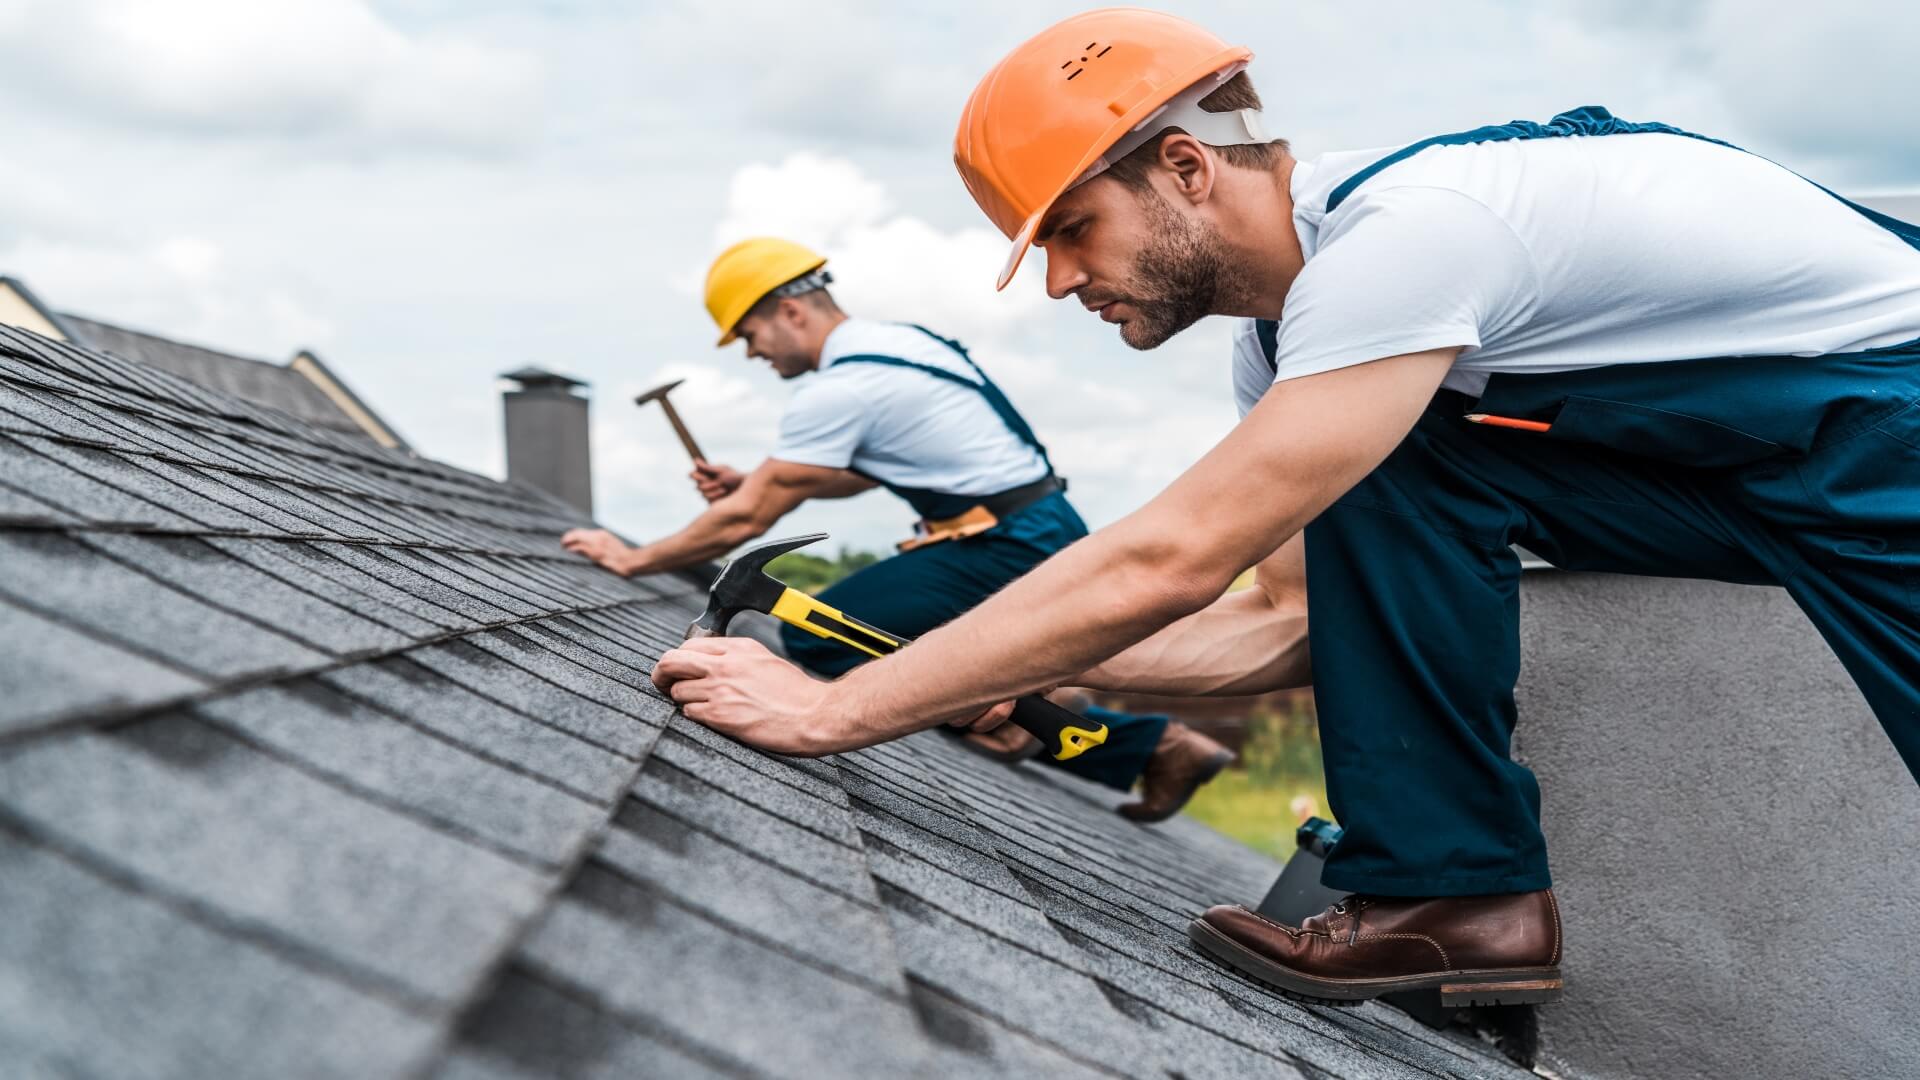 Roof Repair vs. Replacement: Which One Do You Need? - Build Magazine